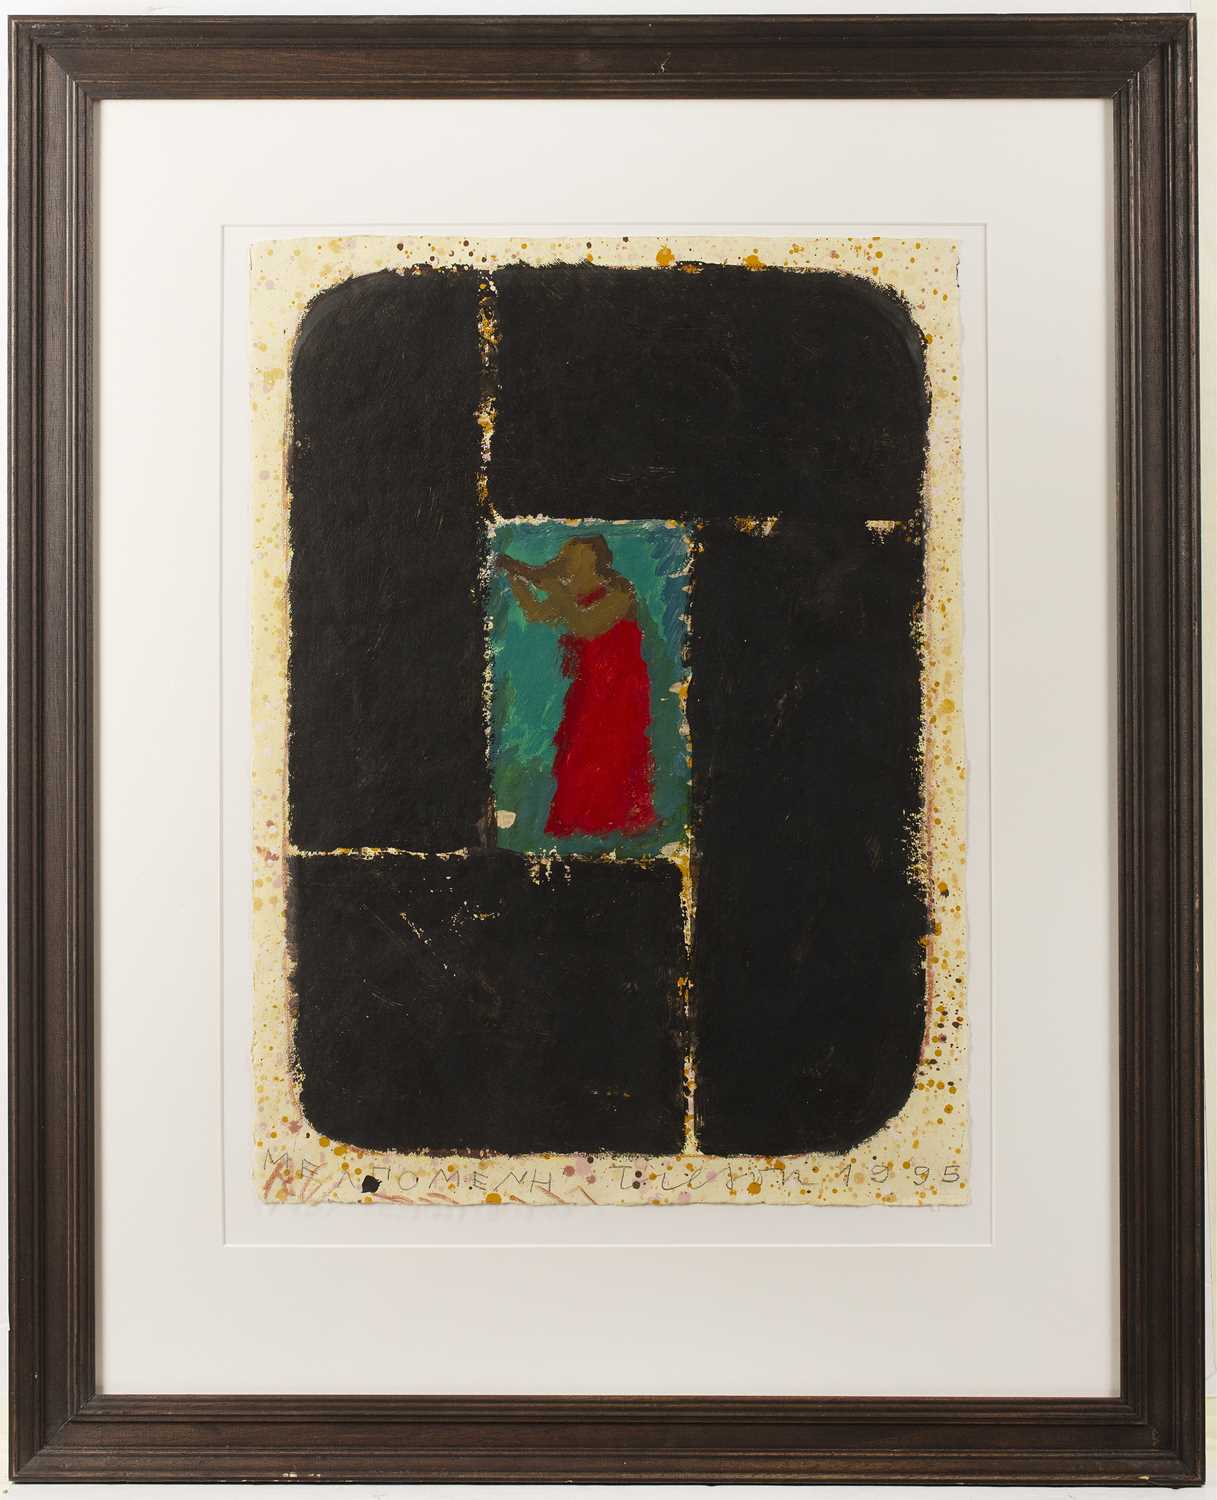 Joe Tilson (1928-2023) Melpomene, 1995 signed, titled, and dated (lower right) acrylic 38 x 51cm. - Image 2 of 3